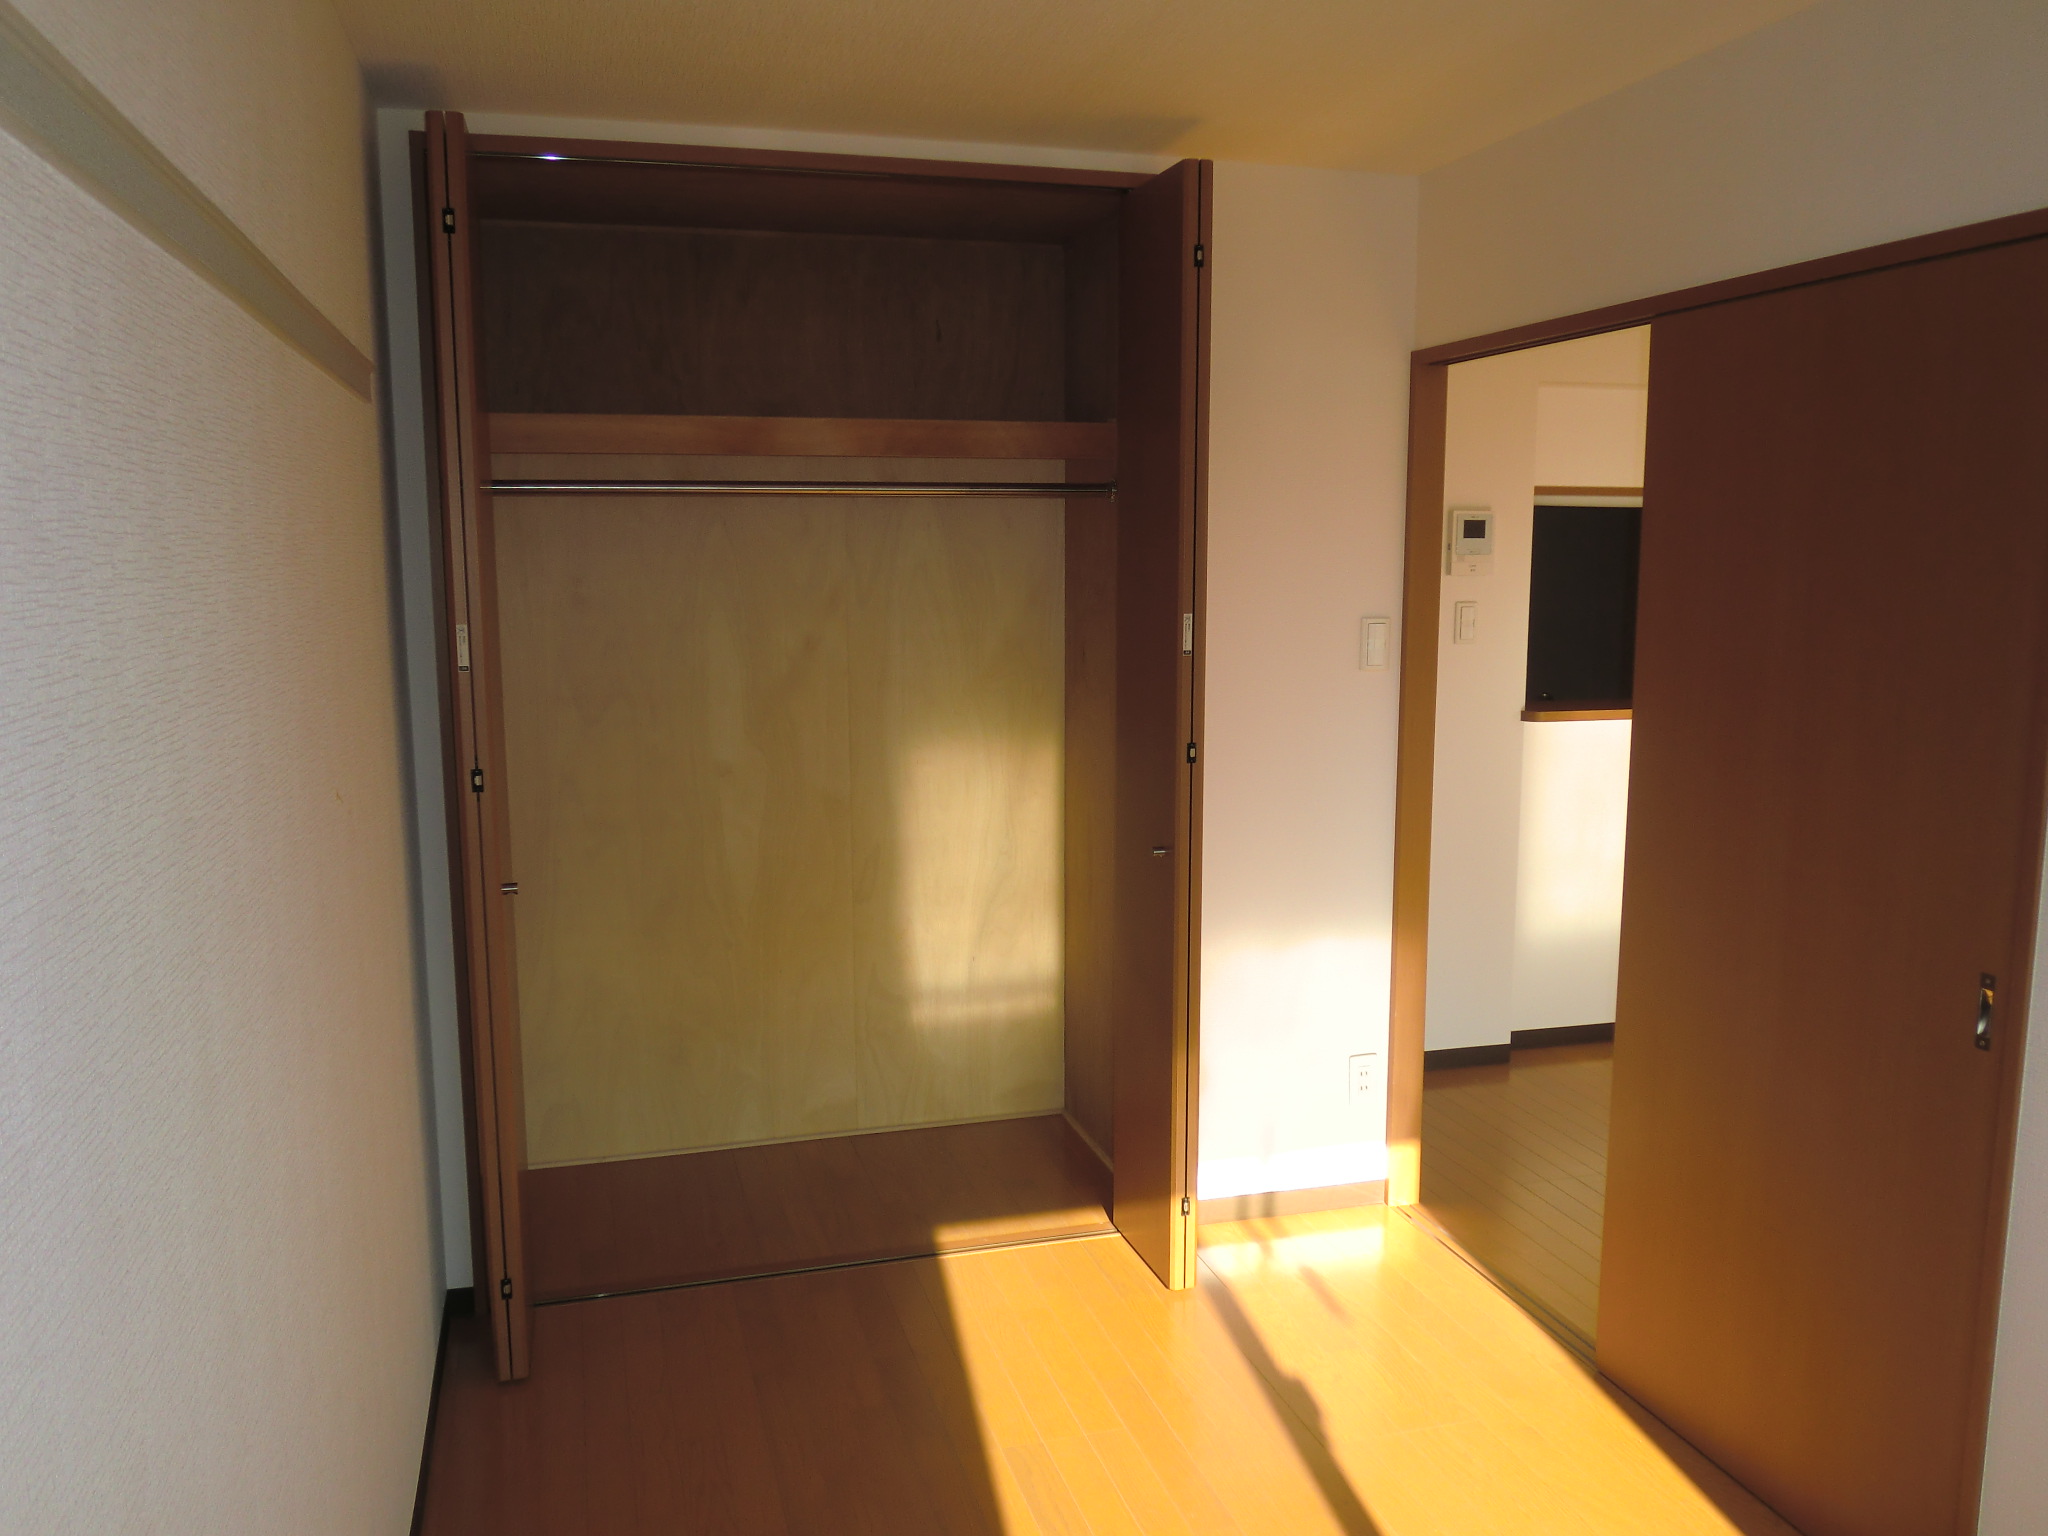 Living and room. Western style room ・ closet